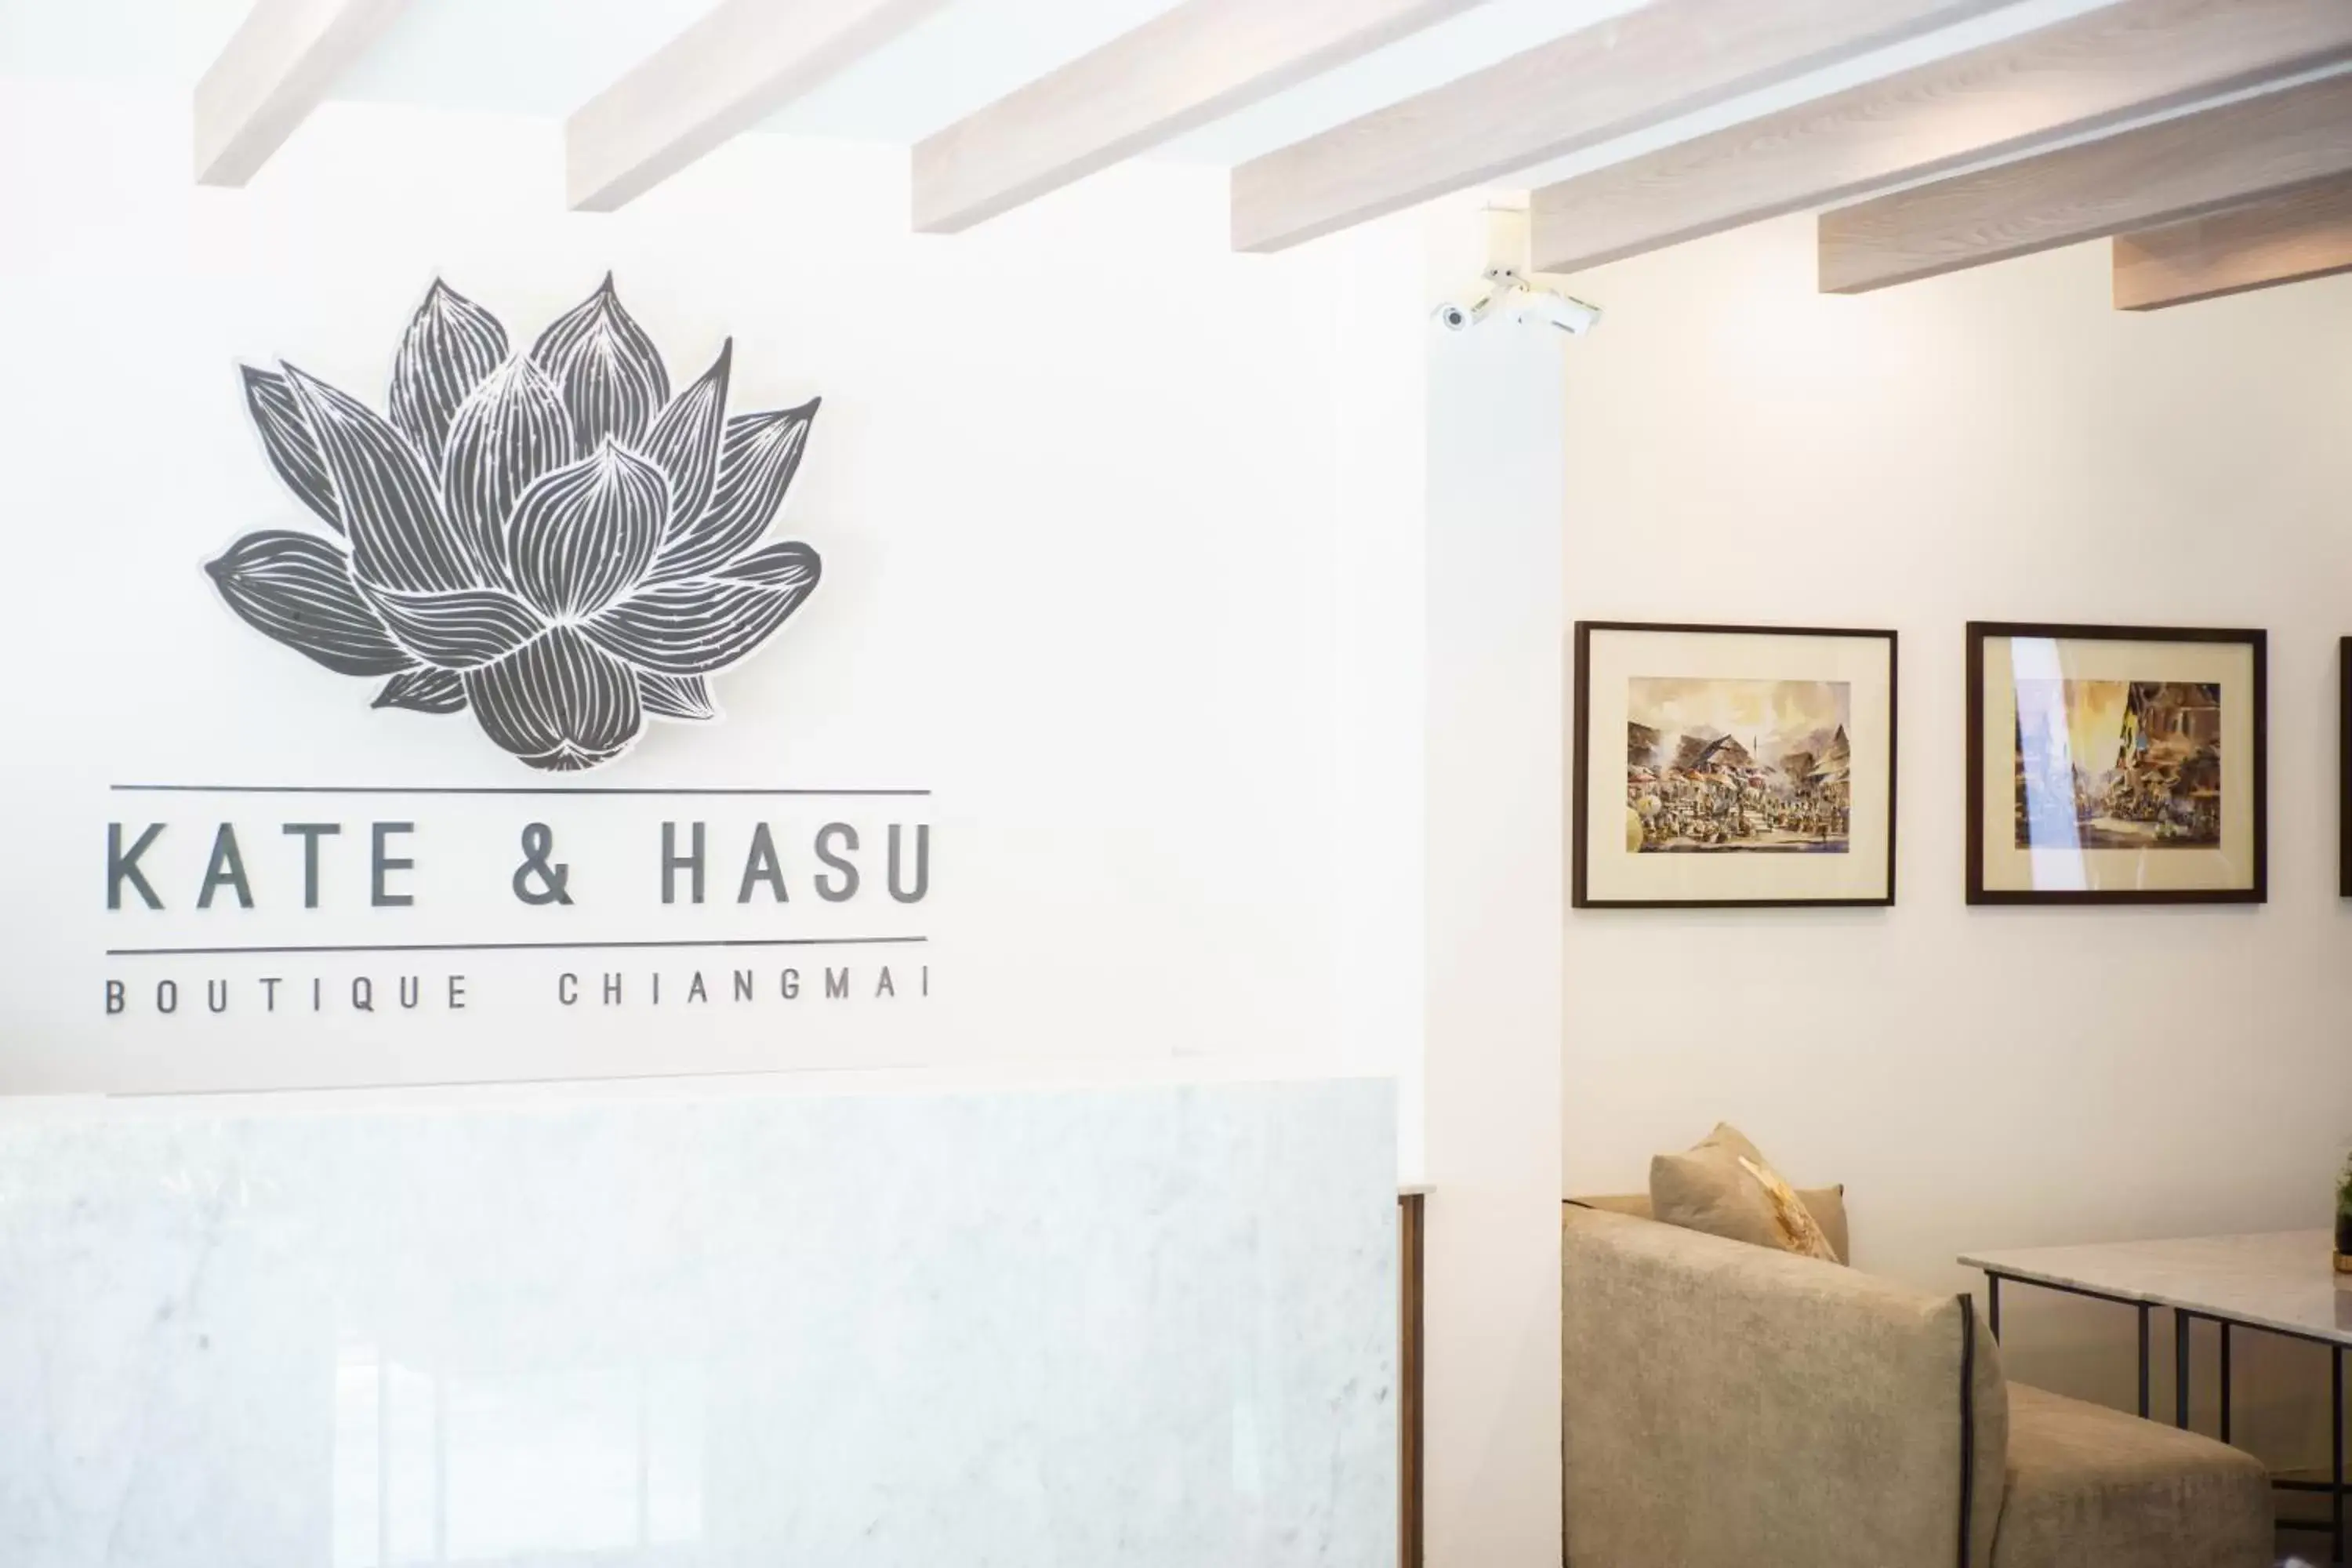 Property logo or sign in Kate and Hasu Boutique Chiangmai